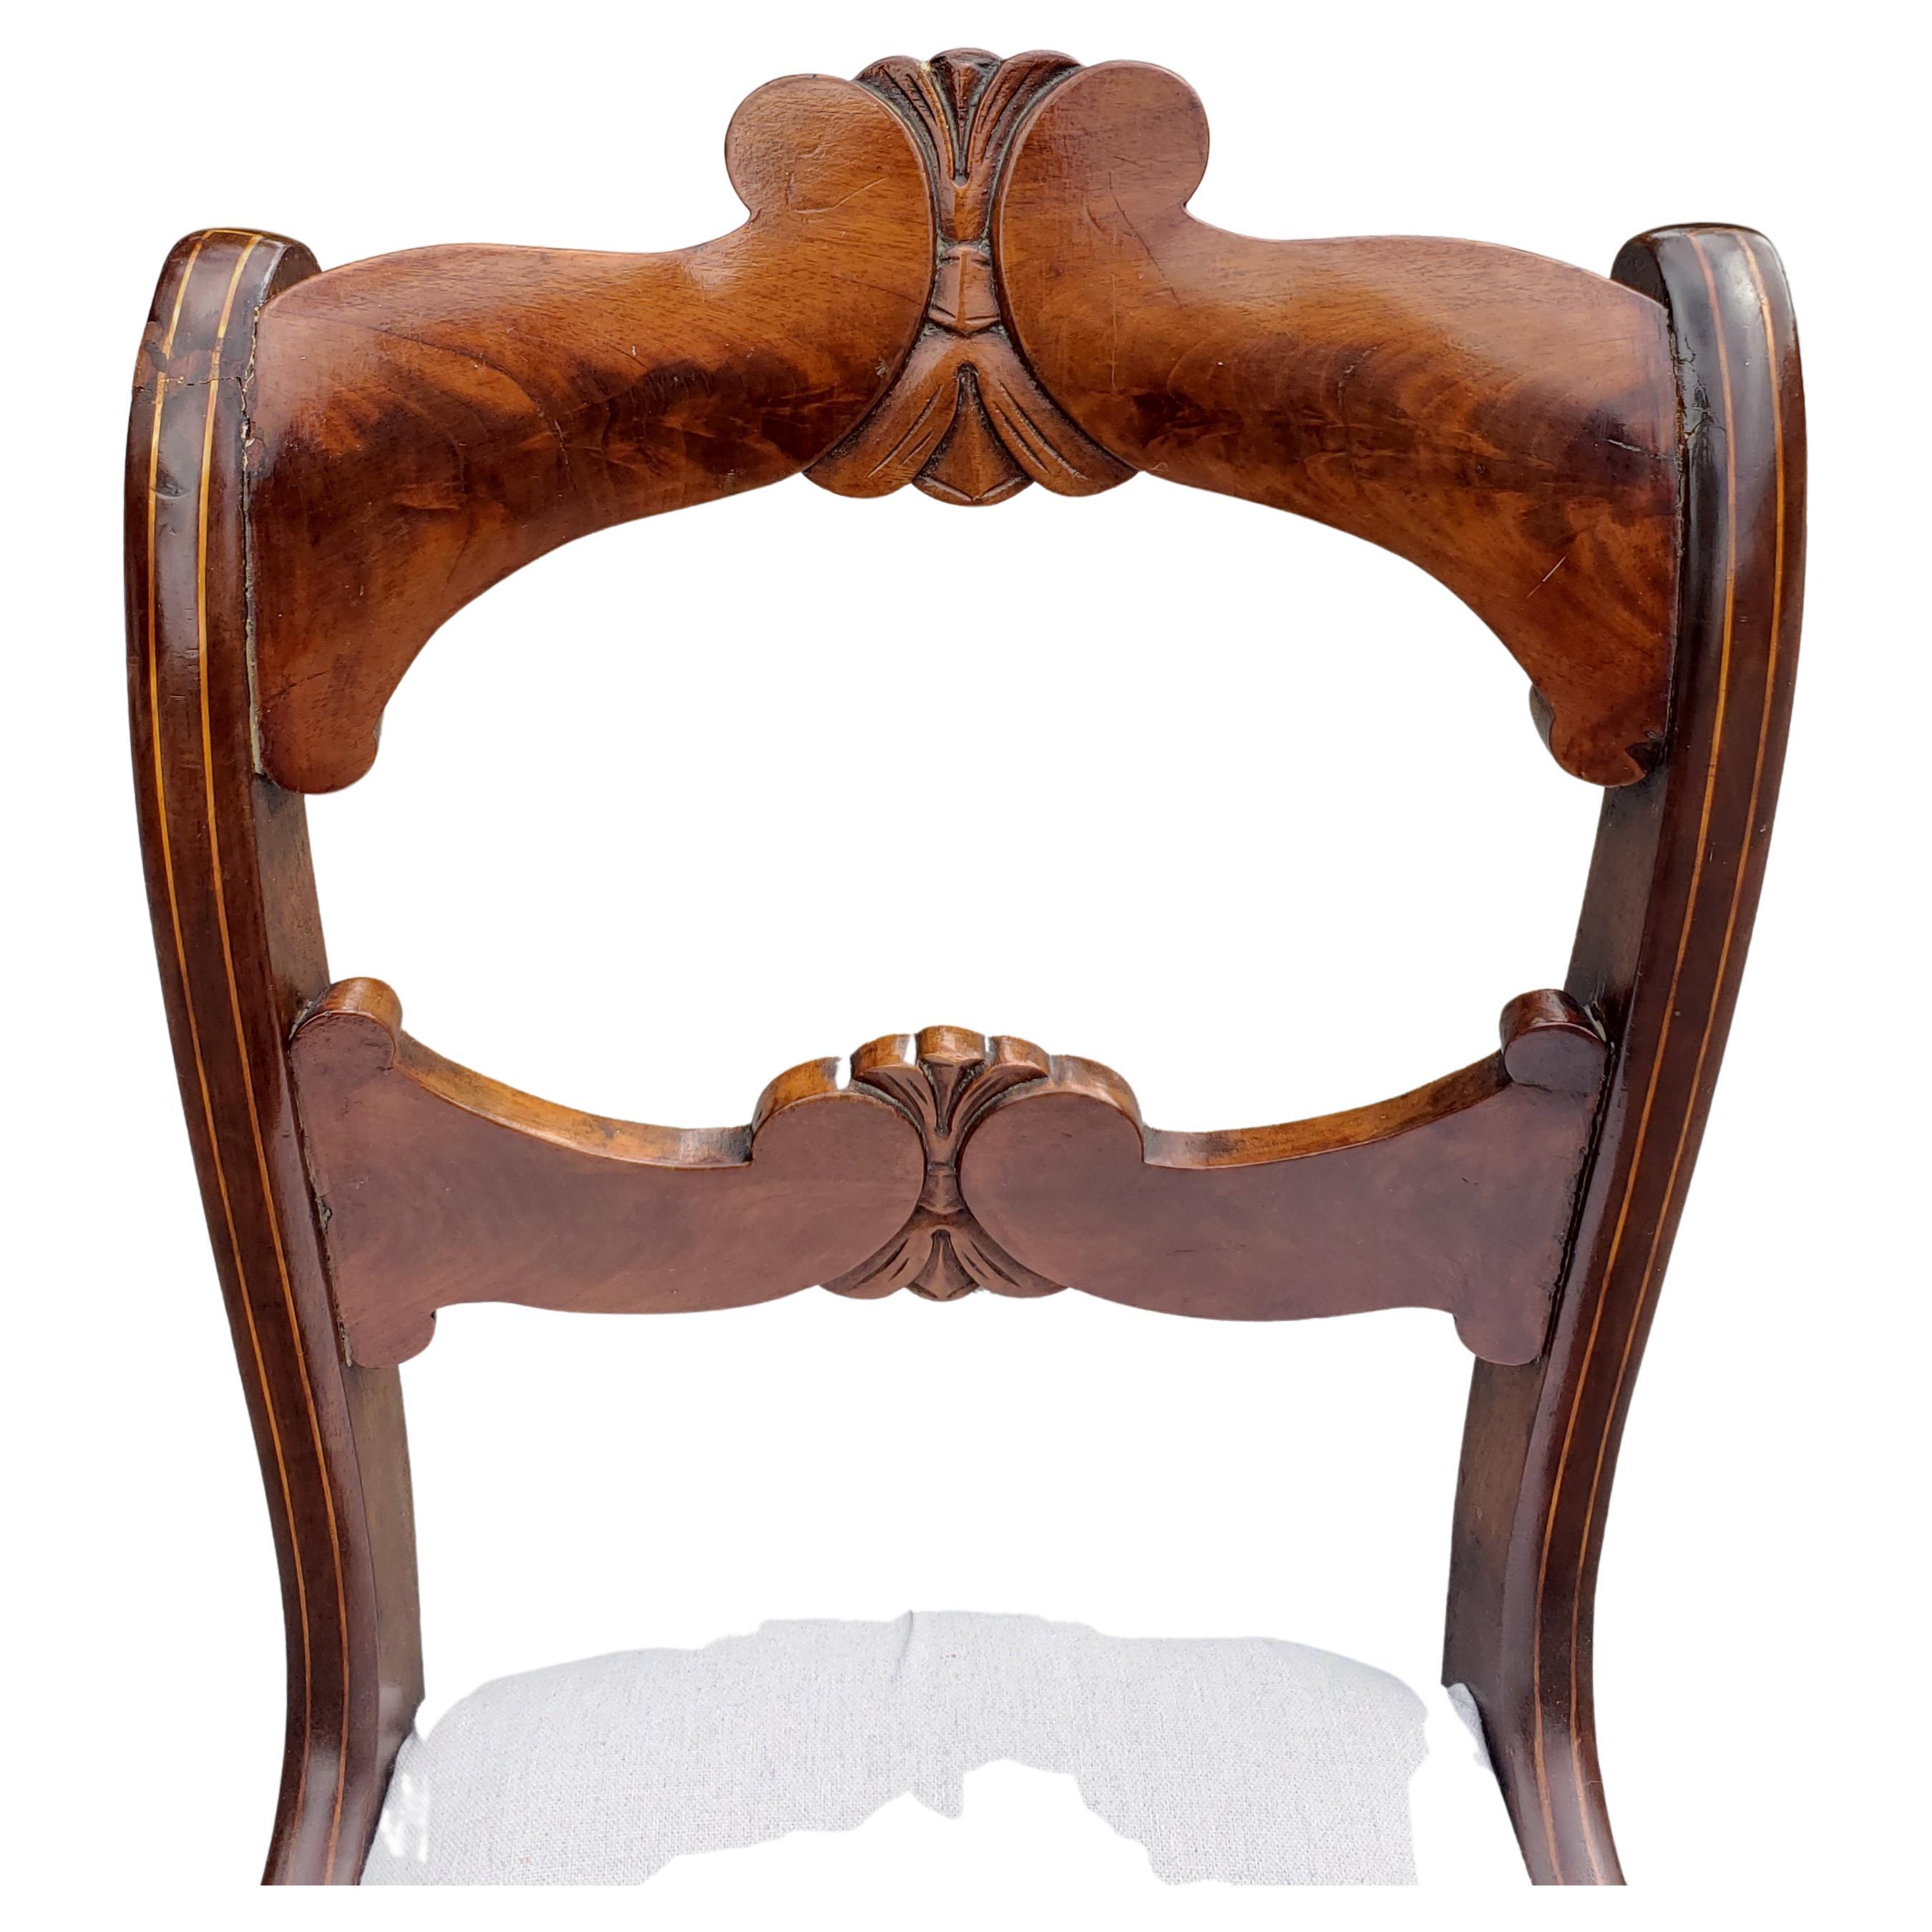 Woodwork 19th C. Flame Mahogany and Satinwood Inlaid with Upholstered Seat Side Chair For Sale